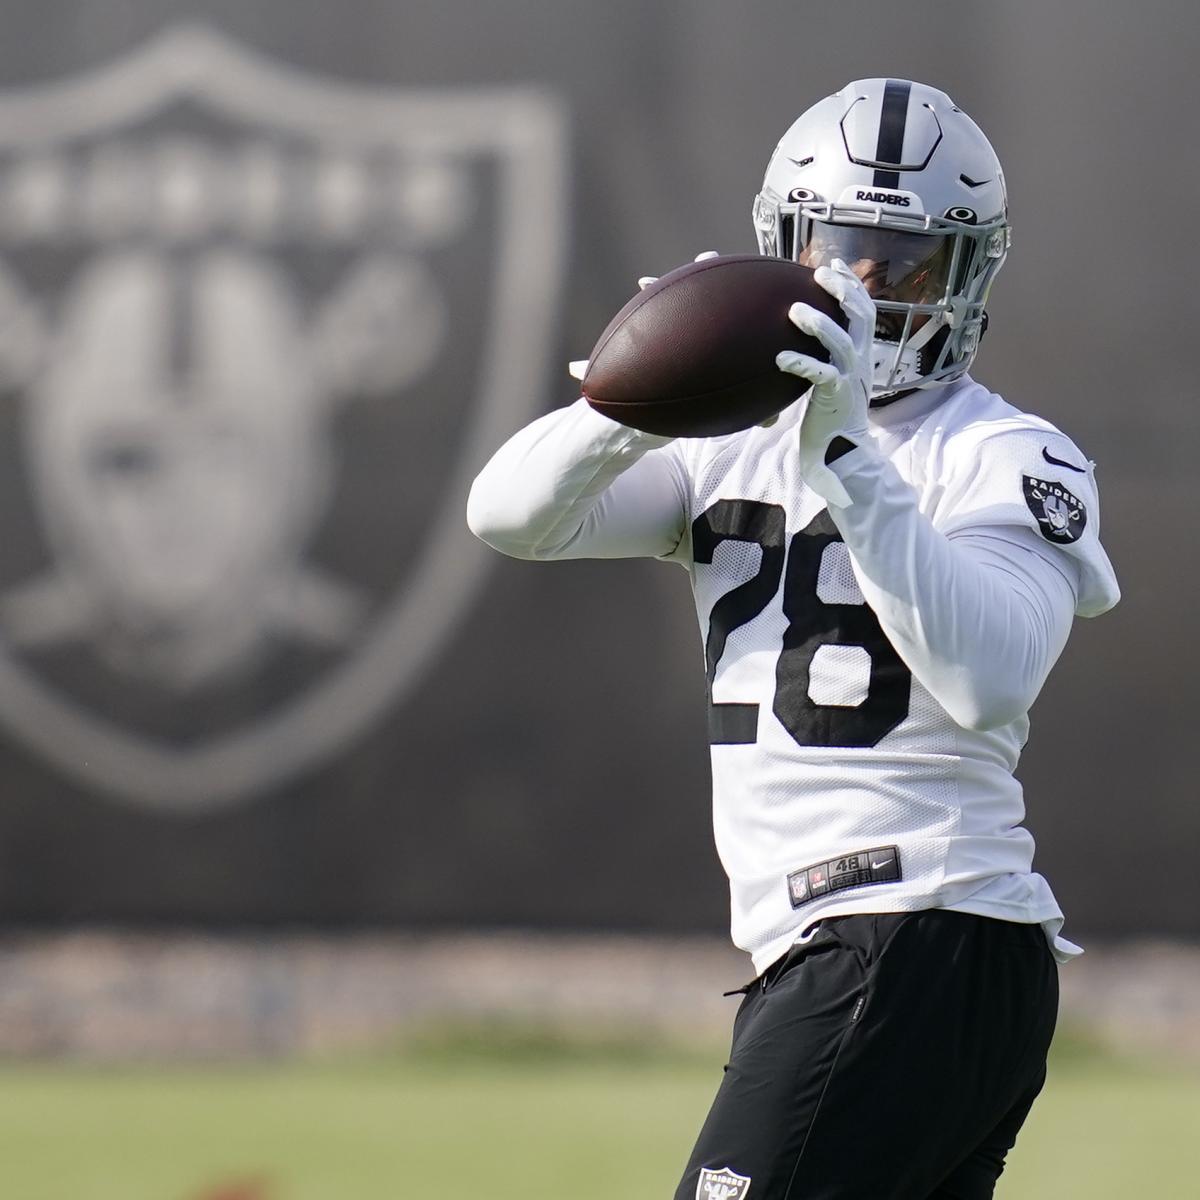 Raiders’ Josh Jacobs Would possibly maybe presumably maybe not Play vs. Steelers Due to the Toe, Ankle Injuries